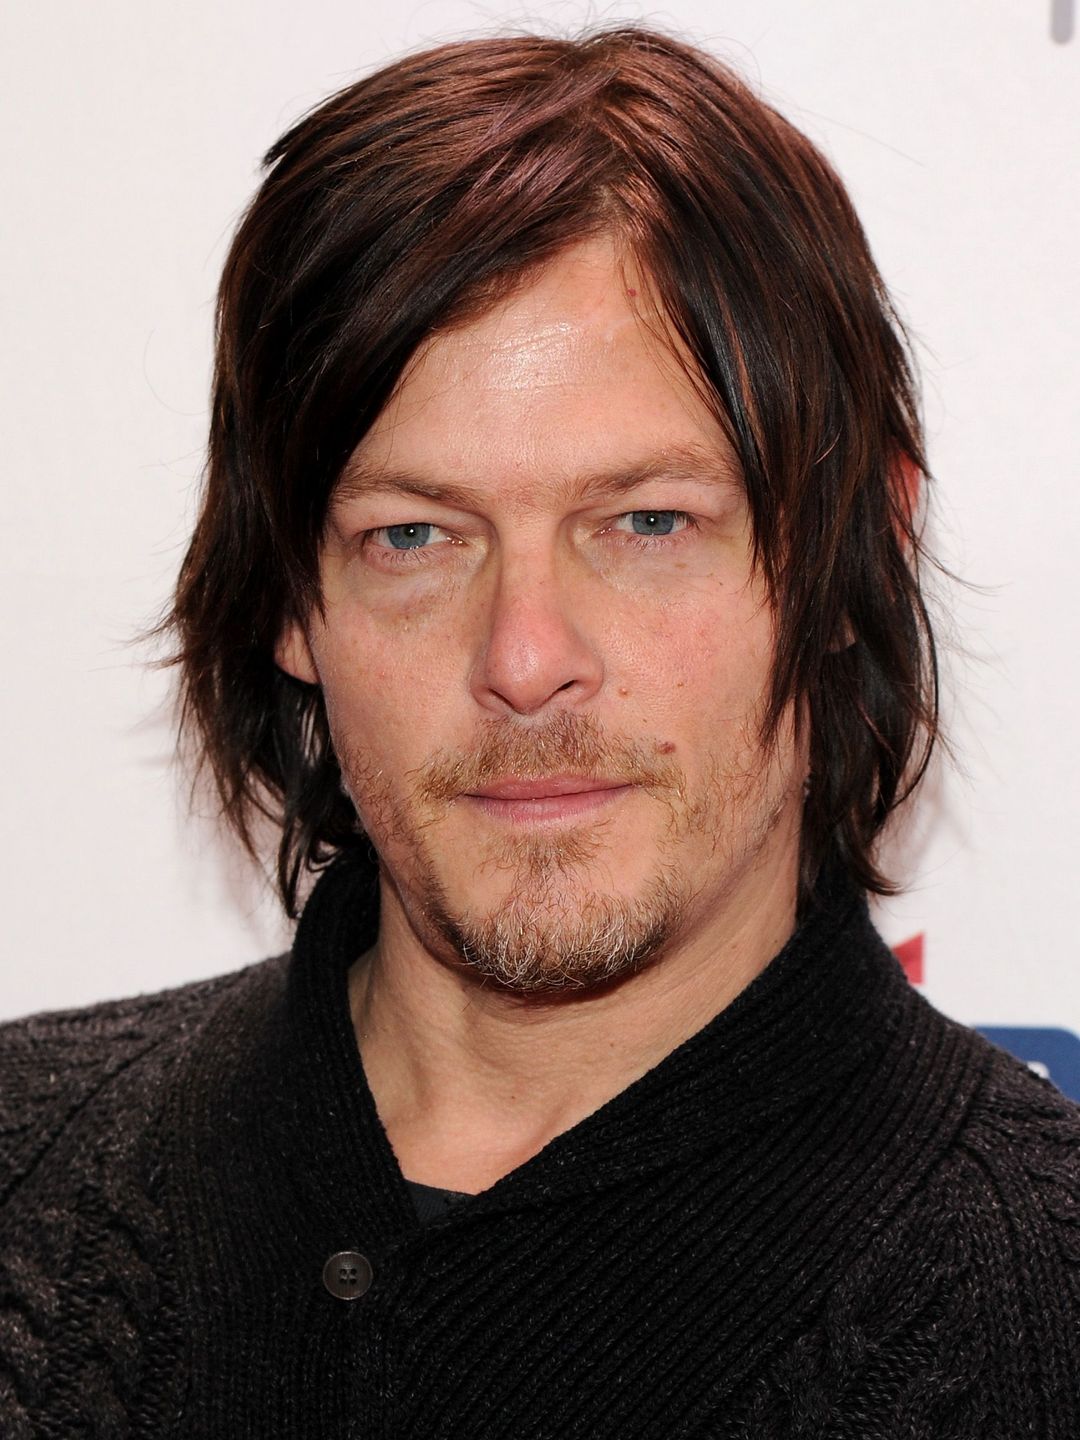 Norman Reedus personal traits